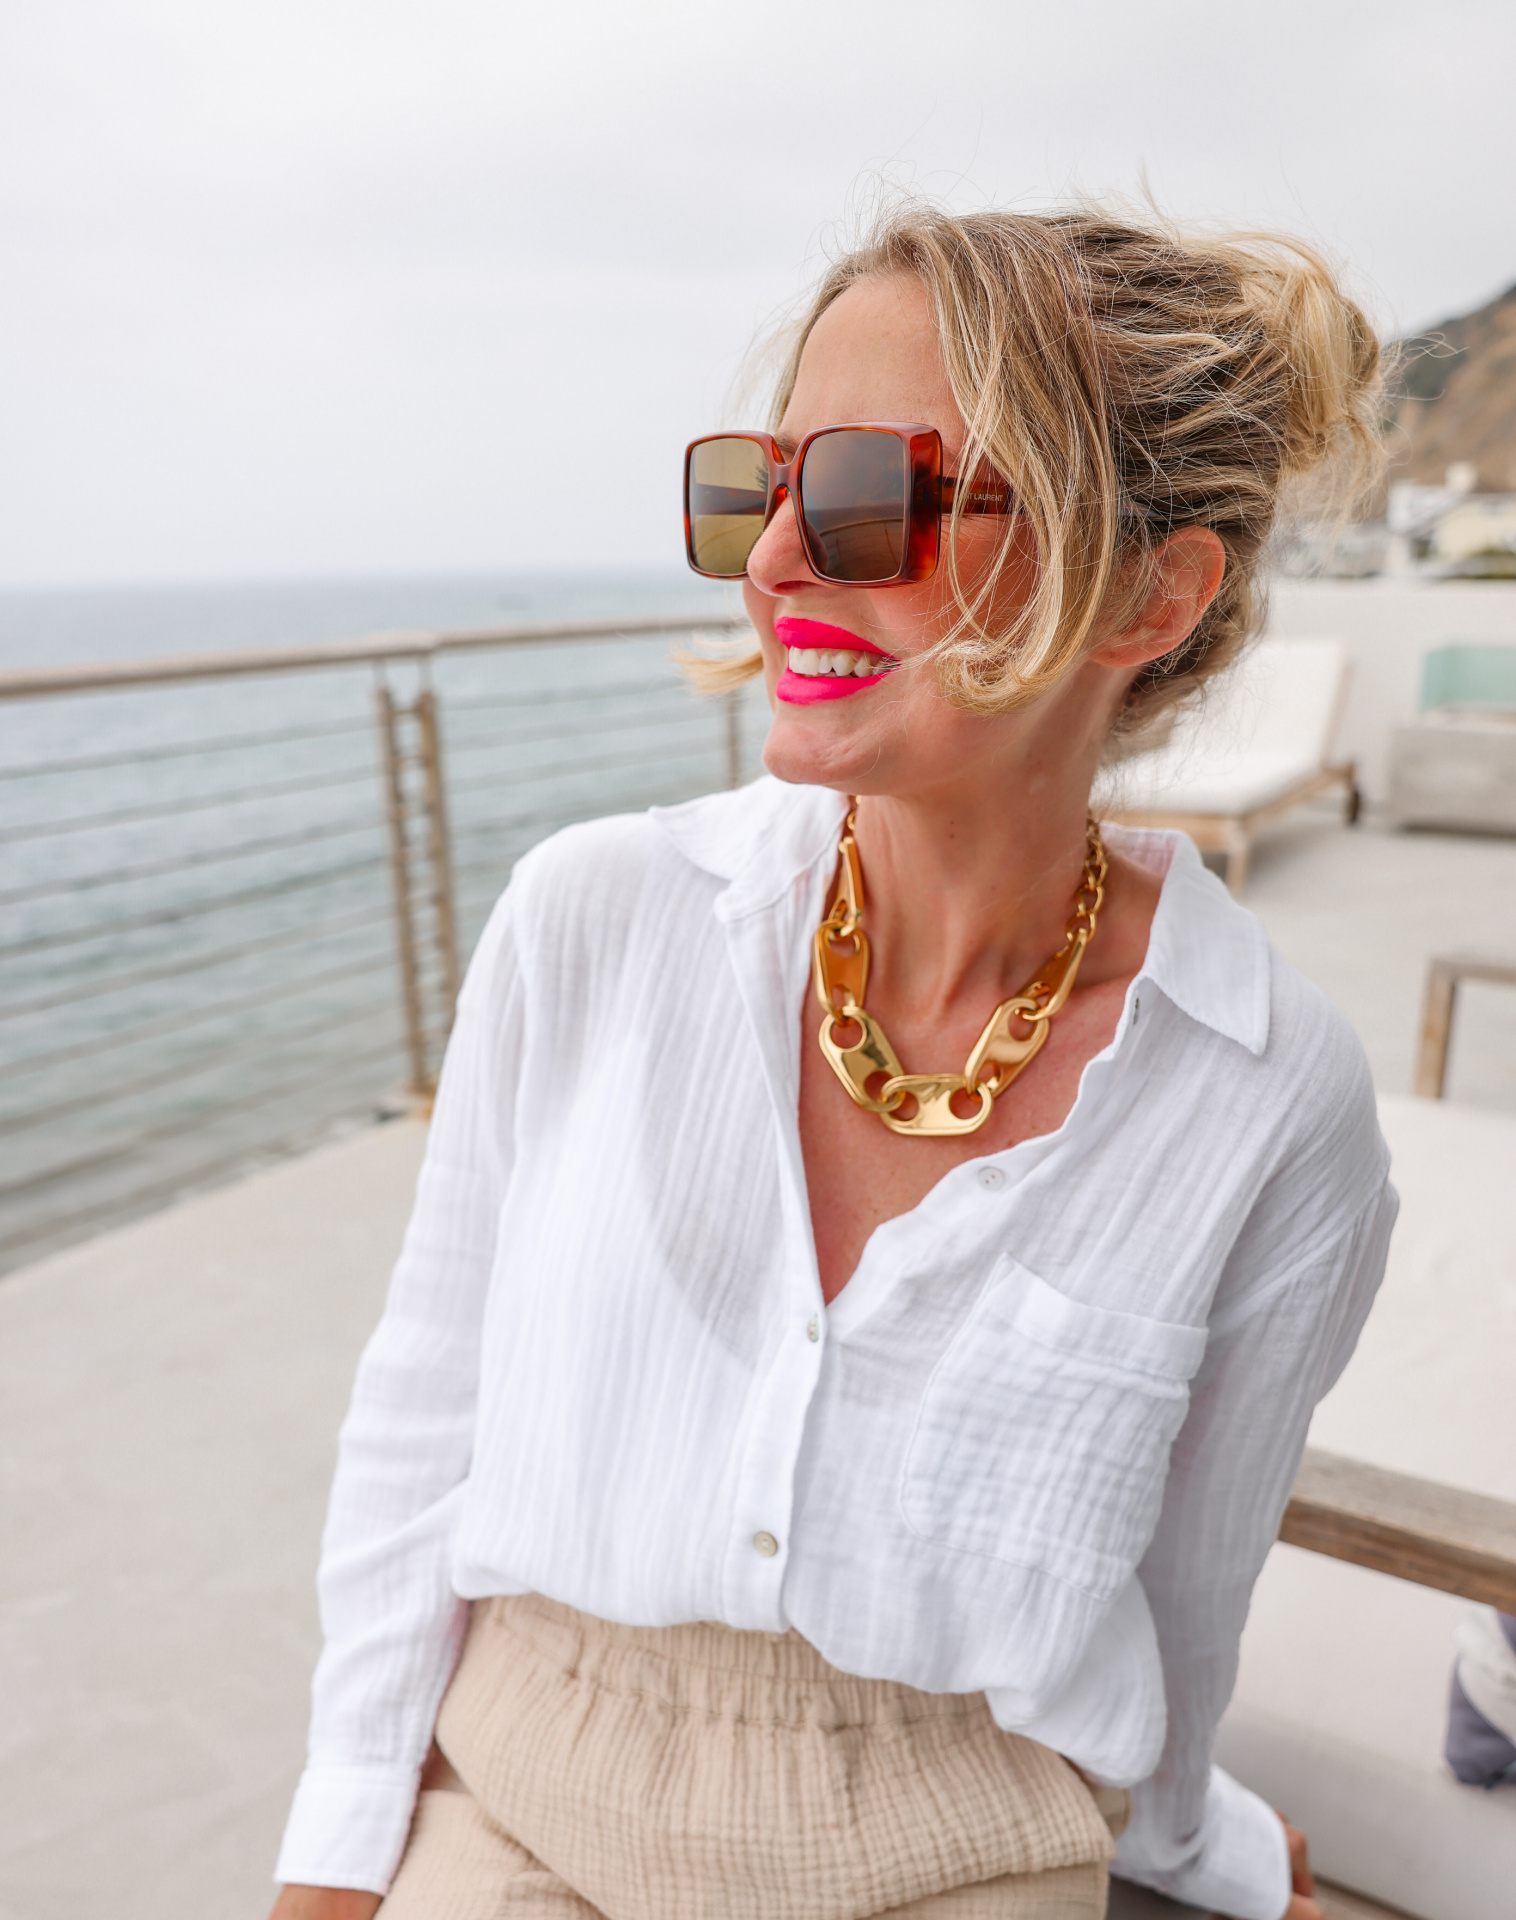 summer mom style, best summer mom outfits, summer mom outfits 2022, casual mom outfits summer, stylish mom outfits 2022, fashion for moms in their 30s, fashion for moms in their 40s, cute mom outfits, casual mom outfits, erin busbee, busbee style, fashion over 40, malibu, california, white rails cotton ellis button down shirt, rails leon gauzy pants, veronica beard woven wedges, saint laurent square sunglasses, paco rabbane chunky gold necklace, sustainability in fashion, sustainable fashion, sustainable fashion brands, why sustainability in fashion matters